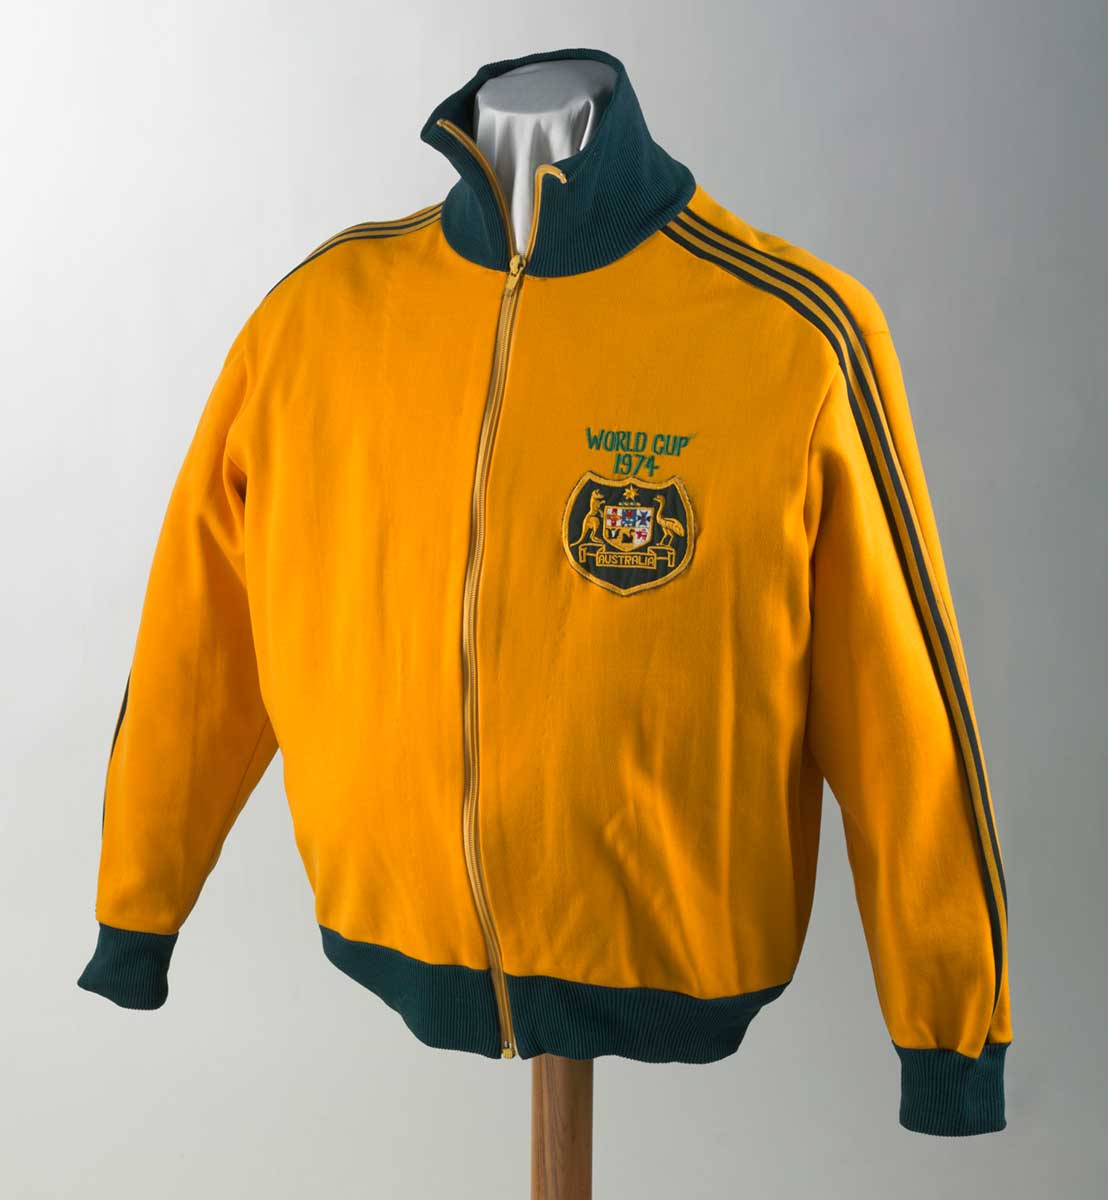 Long-sleeved yellow tracksuit jacket with high elasticated collar, waist and cuffs with zip fastener at front. Australian coat of arms badge sewn front, upper proper left with text above 'WORLD CUP / 1974'. Green stripe detail from shoulder to cuffs along sleeves. - click to view larger image